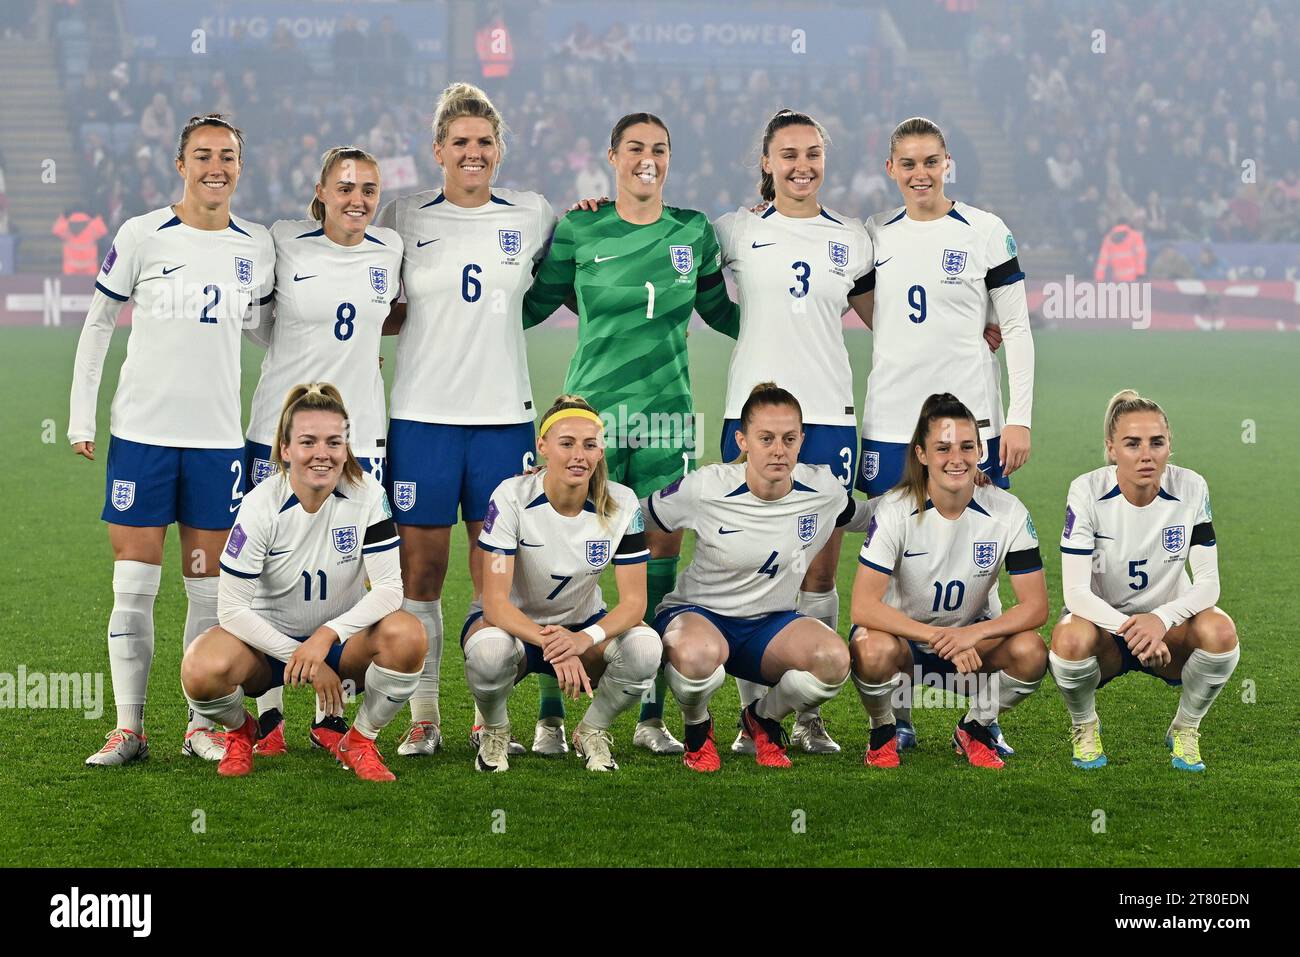 players of England with Lucy Bronze (2) of England, Georgia Stanway (8) of England, Millie Bright (6) of England, goalkeeper Mary Earps (1) of England, Niamh Charles (3) of England, Alessia Russo (9) of England, Lauren Hemp (11) of England, Chloe Kelly (7) of England, Keira Walsh (4) of England, Ella Toone (10) of England and Alex Greenwood (5) of England pose for a team photo during a football match between the national women team of England, called the Lionesses and Belgium, called the Red Flames on matchday 3 in the 2023-24 UEFA Women's Nations League competition in group A1, on Friday 2 Stock Photo